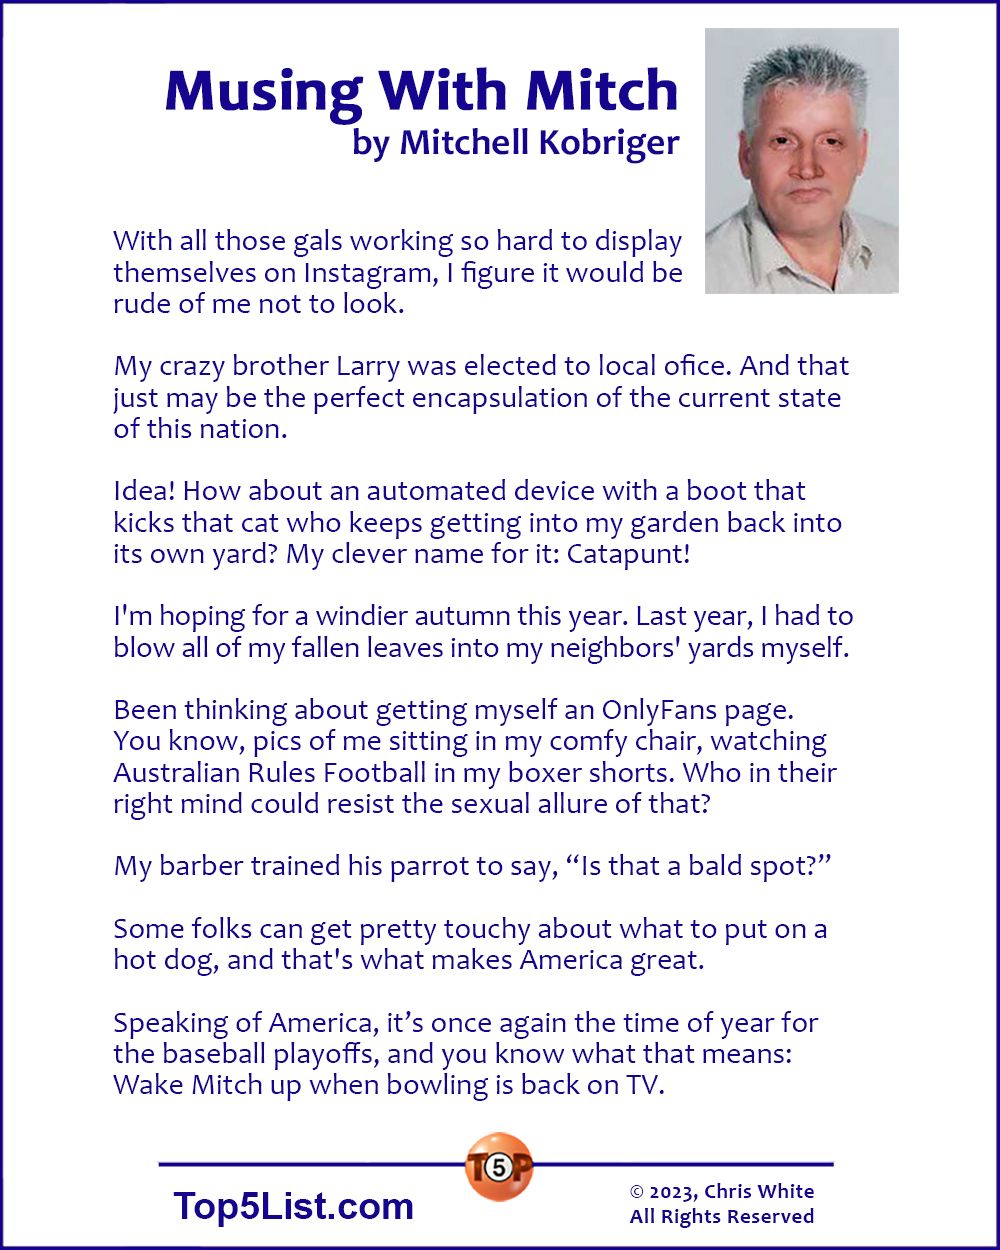 10-6-23  Musing With Mitch, by Mitchell Kobriger  |  With all those gals working so hard to display themselves on Instagram, I figure it would be rude of me not to look.  My crazy brother Larry was elected to local ofice. And that just may be the perfect encapsulation of the current state of this nation.  Idea! How about an automated device with a boot that kicks that cat who keeps getting into my garden back into its own yard? My clever name for it: Catapunt!  I'm hoping for a windier autumn this year. Last year, I had to blow all of my fallen leaves into my neighbors' yards myself.  Been thinking about getting myself an OnlyFans page. You know, pics of me sitting in my comfy chair, watching Australian Rules Football in my boxer shorts. Who in their right mind could resist the sexual allure of that?  My barber trained his parrot to say, “Is that a bald spot?”   Some folks can get pretty touchy about what to put on a hot dog, and that's what makes America great.  Speaking of America, it’s once again the time of year for the baseball playoffs, and you know what that means: Wake Mitch up when bowling is back on TV.